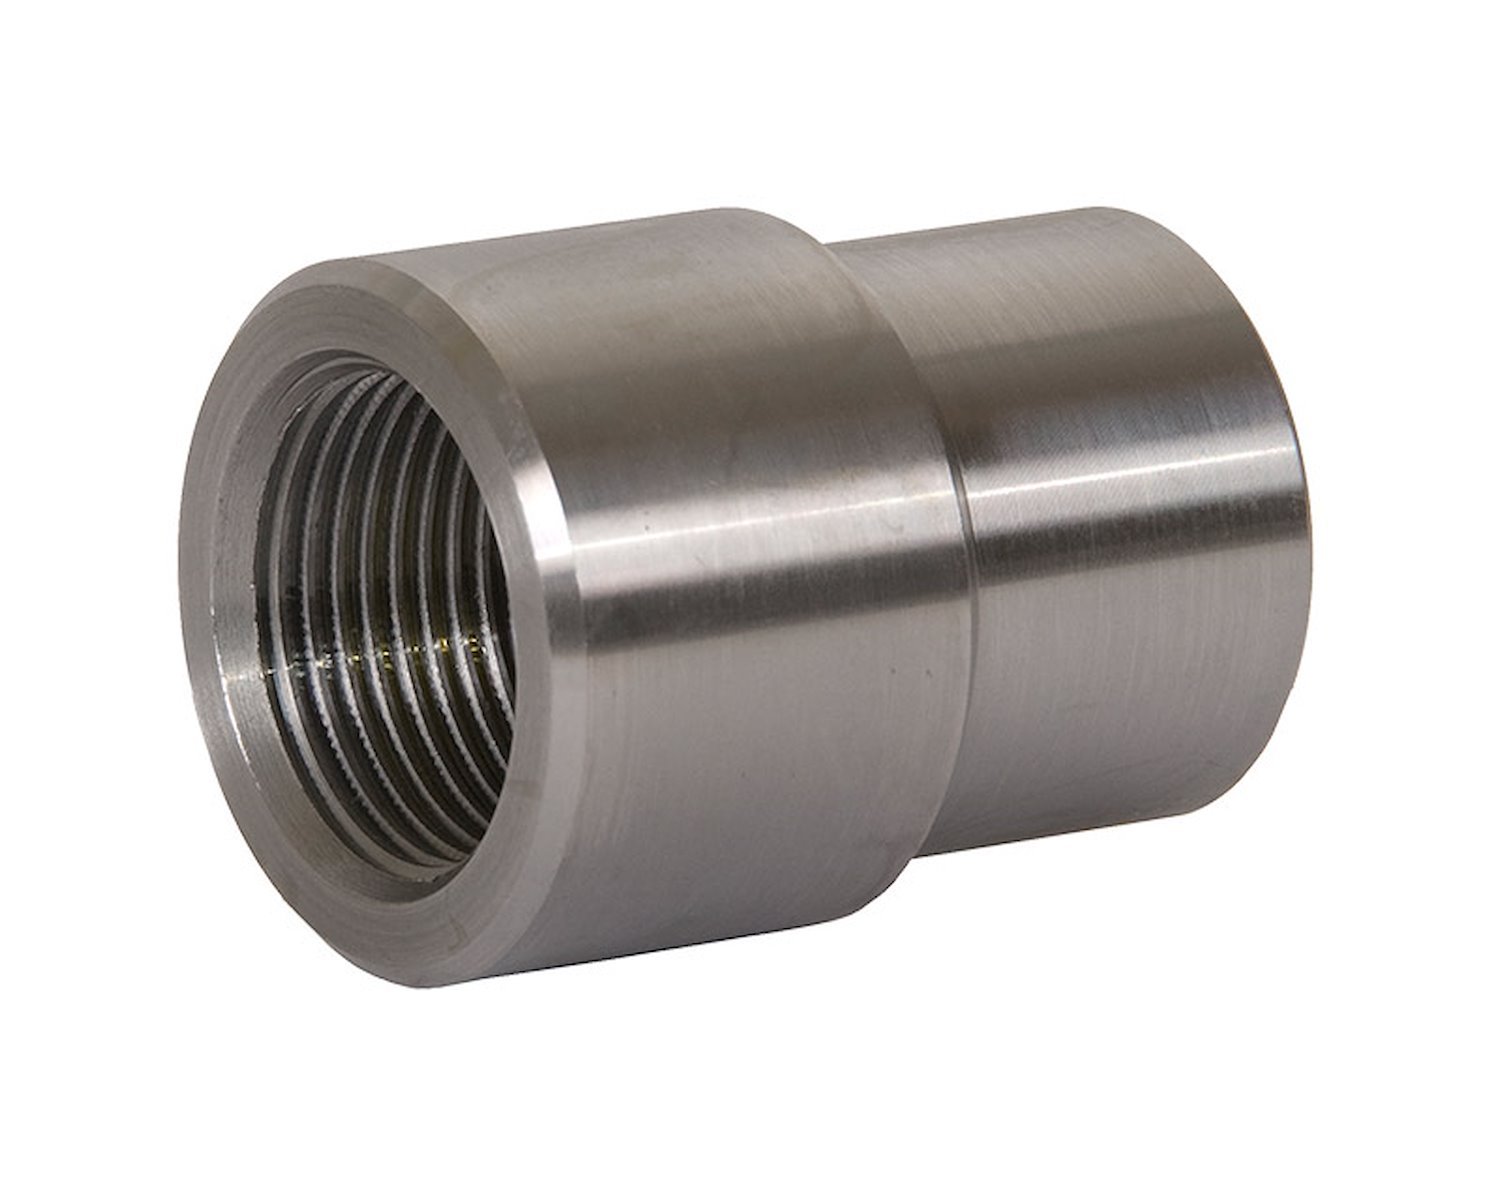 Threaded Tube Adapter Bung For use with 1.5